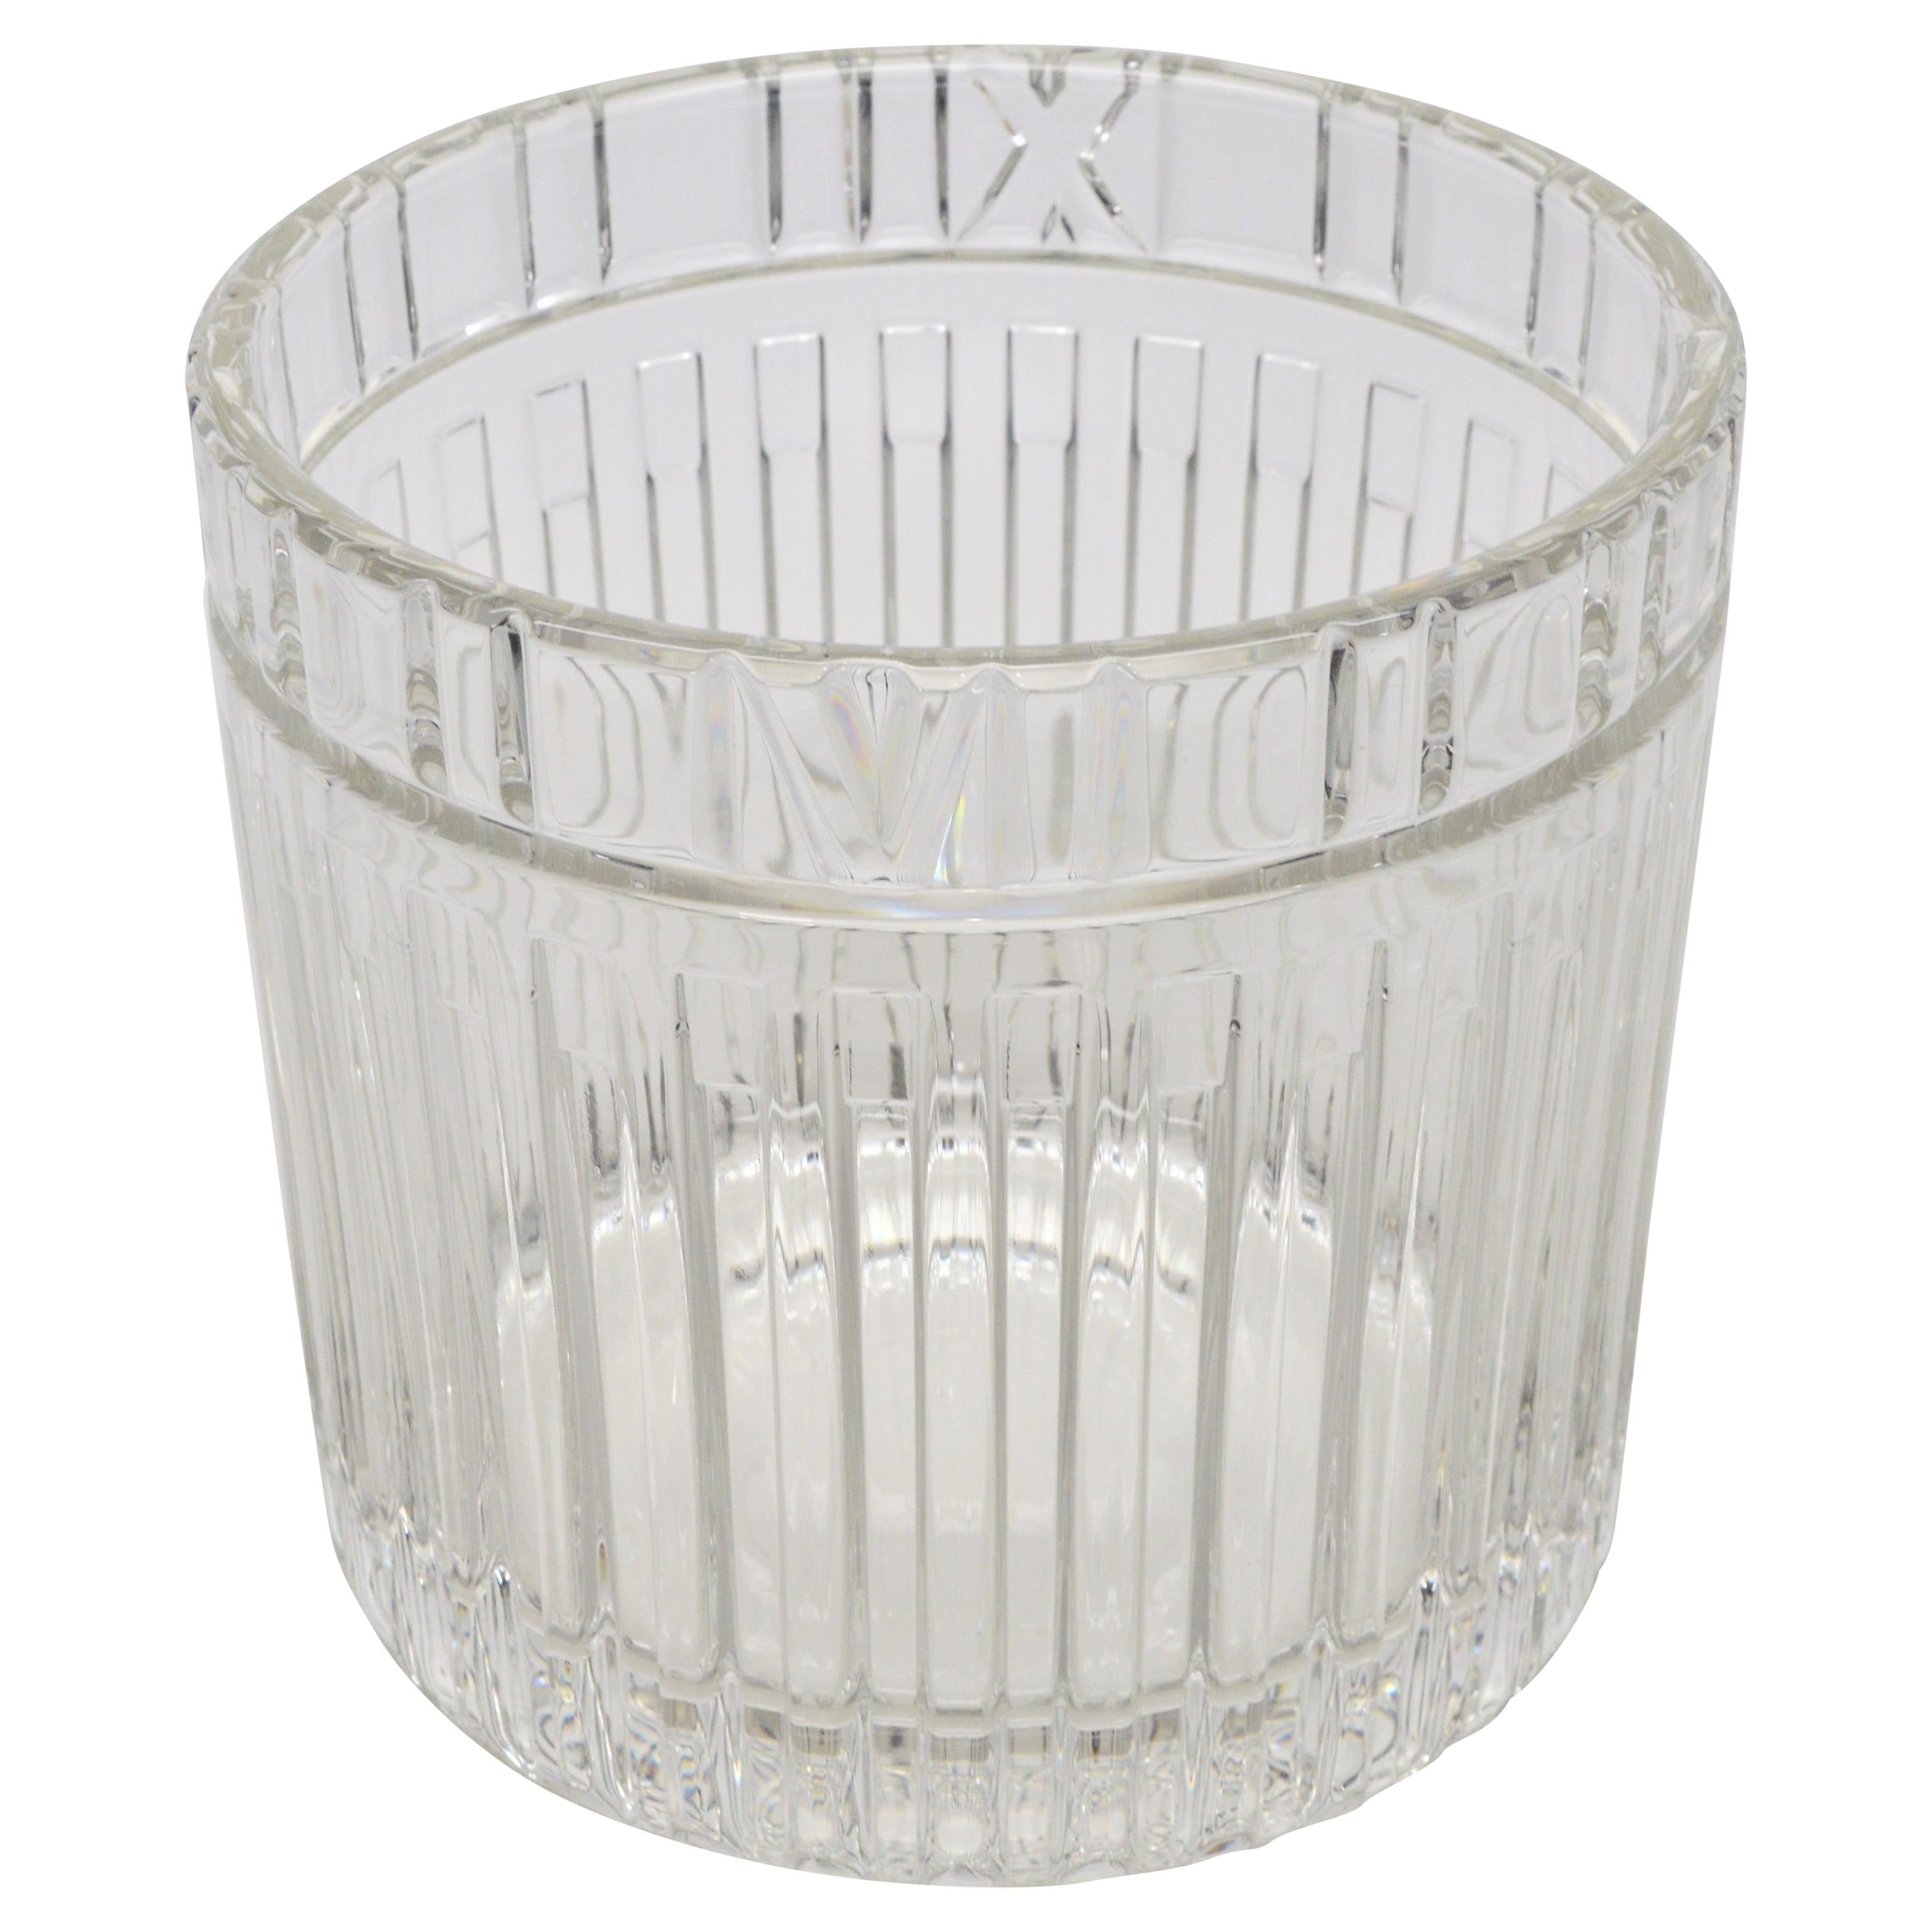 Tiffany & Co. Atlas Crystal Glass Champagne Ice Cooler Bucket